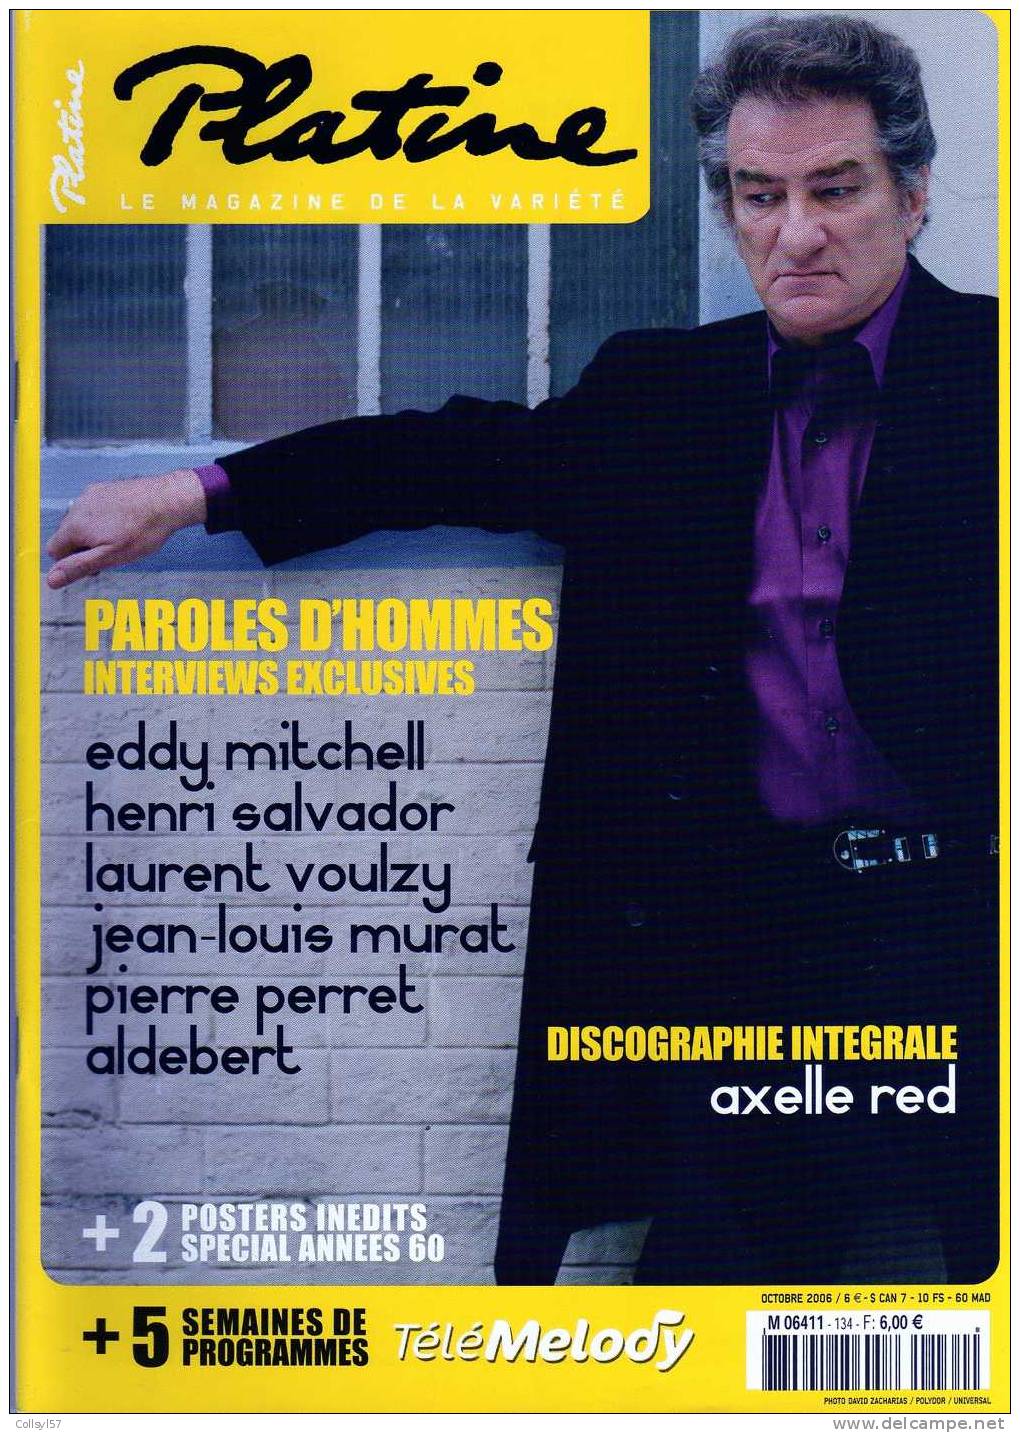 MAG PLATINE N°134 -2006 - EDDY MITCHELL - VOULZY - PERRET - AXELLE RED - Magazines